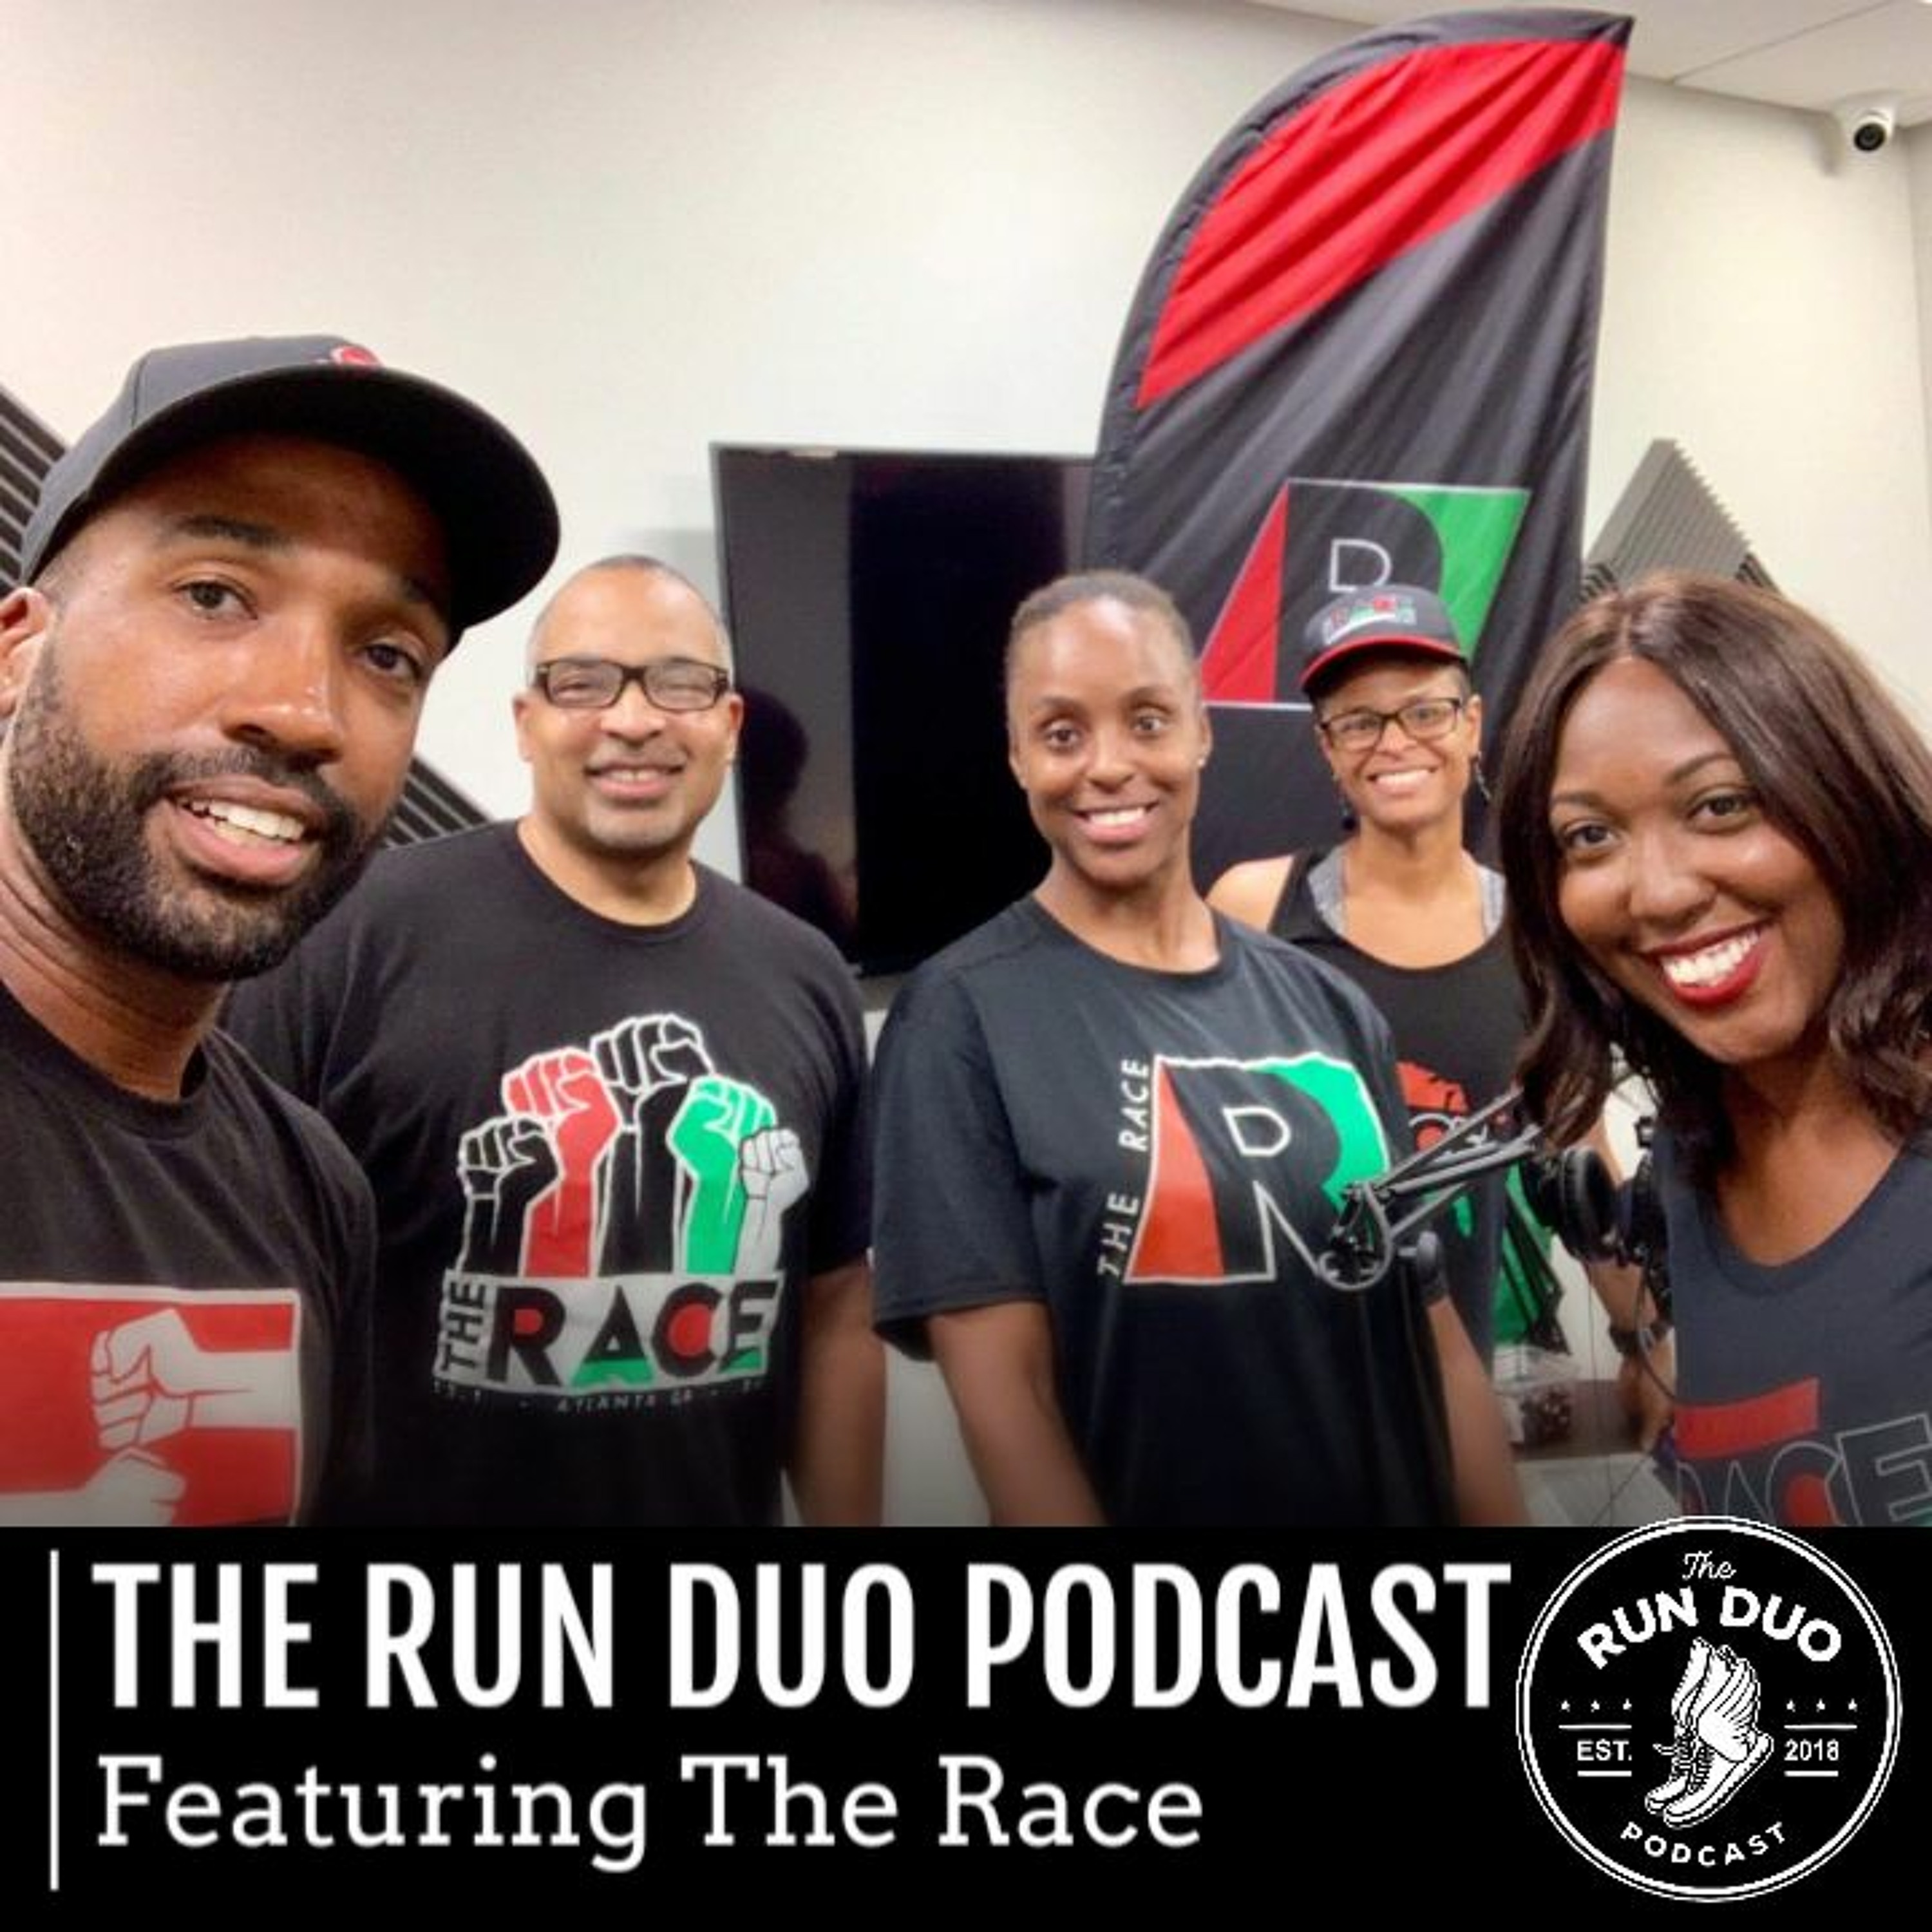 Hear what you don’t want to miss at The Race 2019 from 3 of the founders